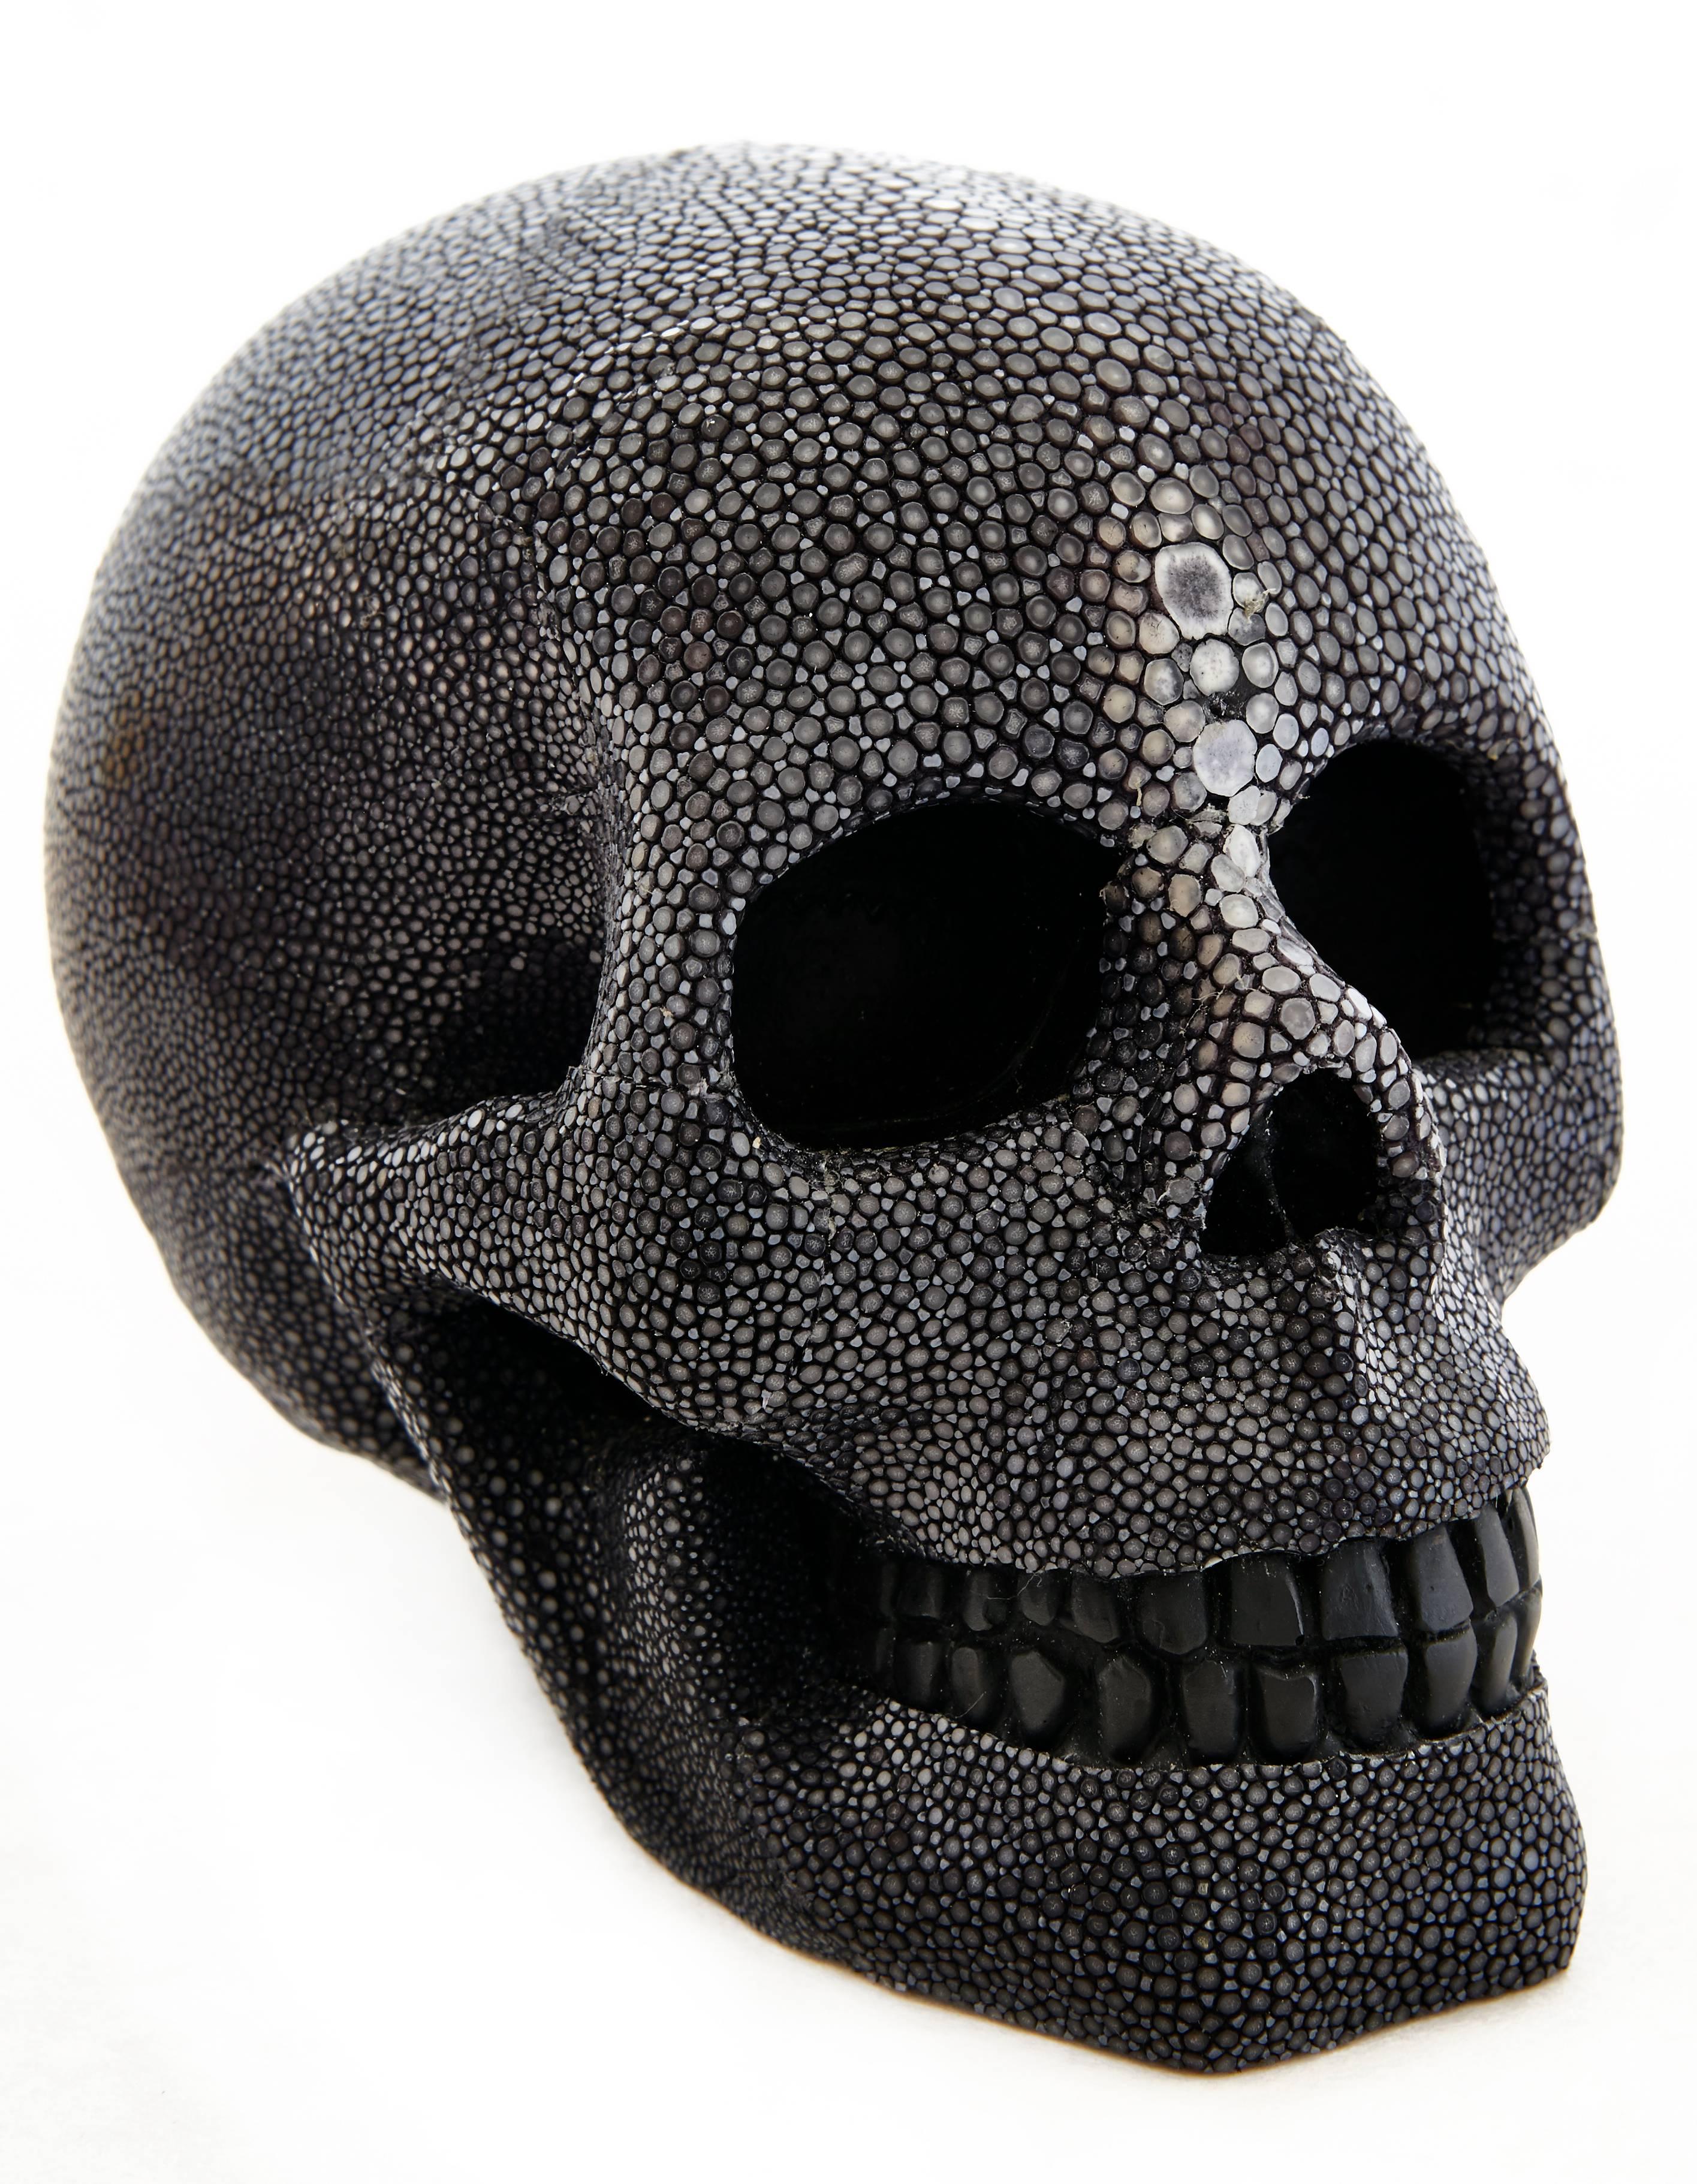 Adapted from Christina Z Antonio’s Cadavre Exquis installation at the Gramercy Park Hotel, this mini decorative sculpture features hand-molded shagreen covering a resin cast skull. Weight is 3lbs.